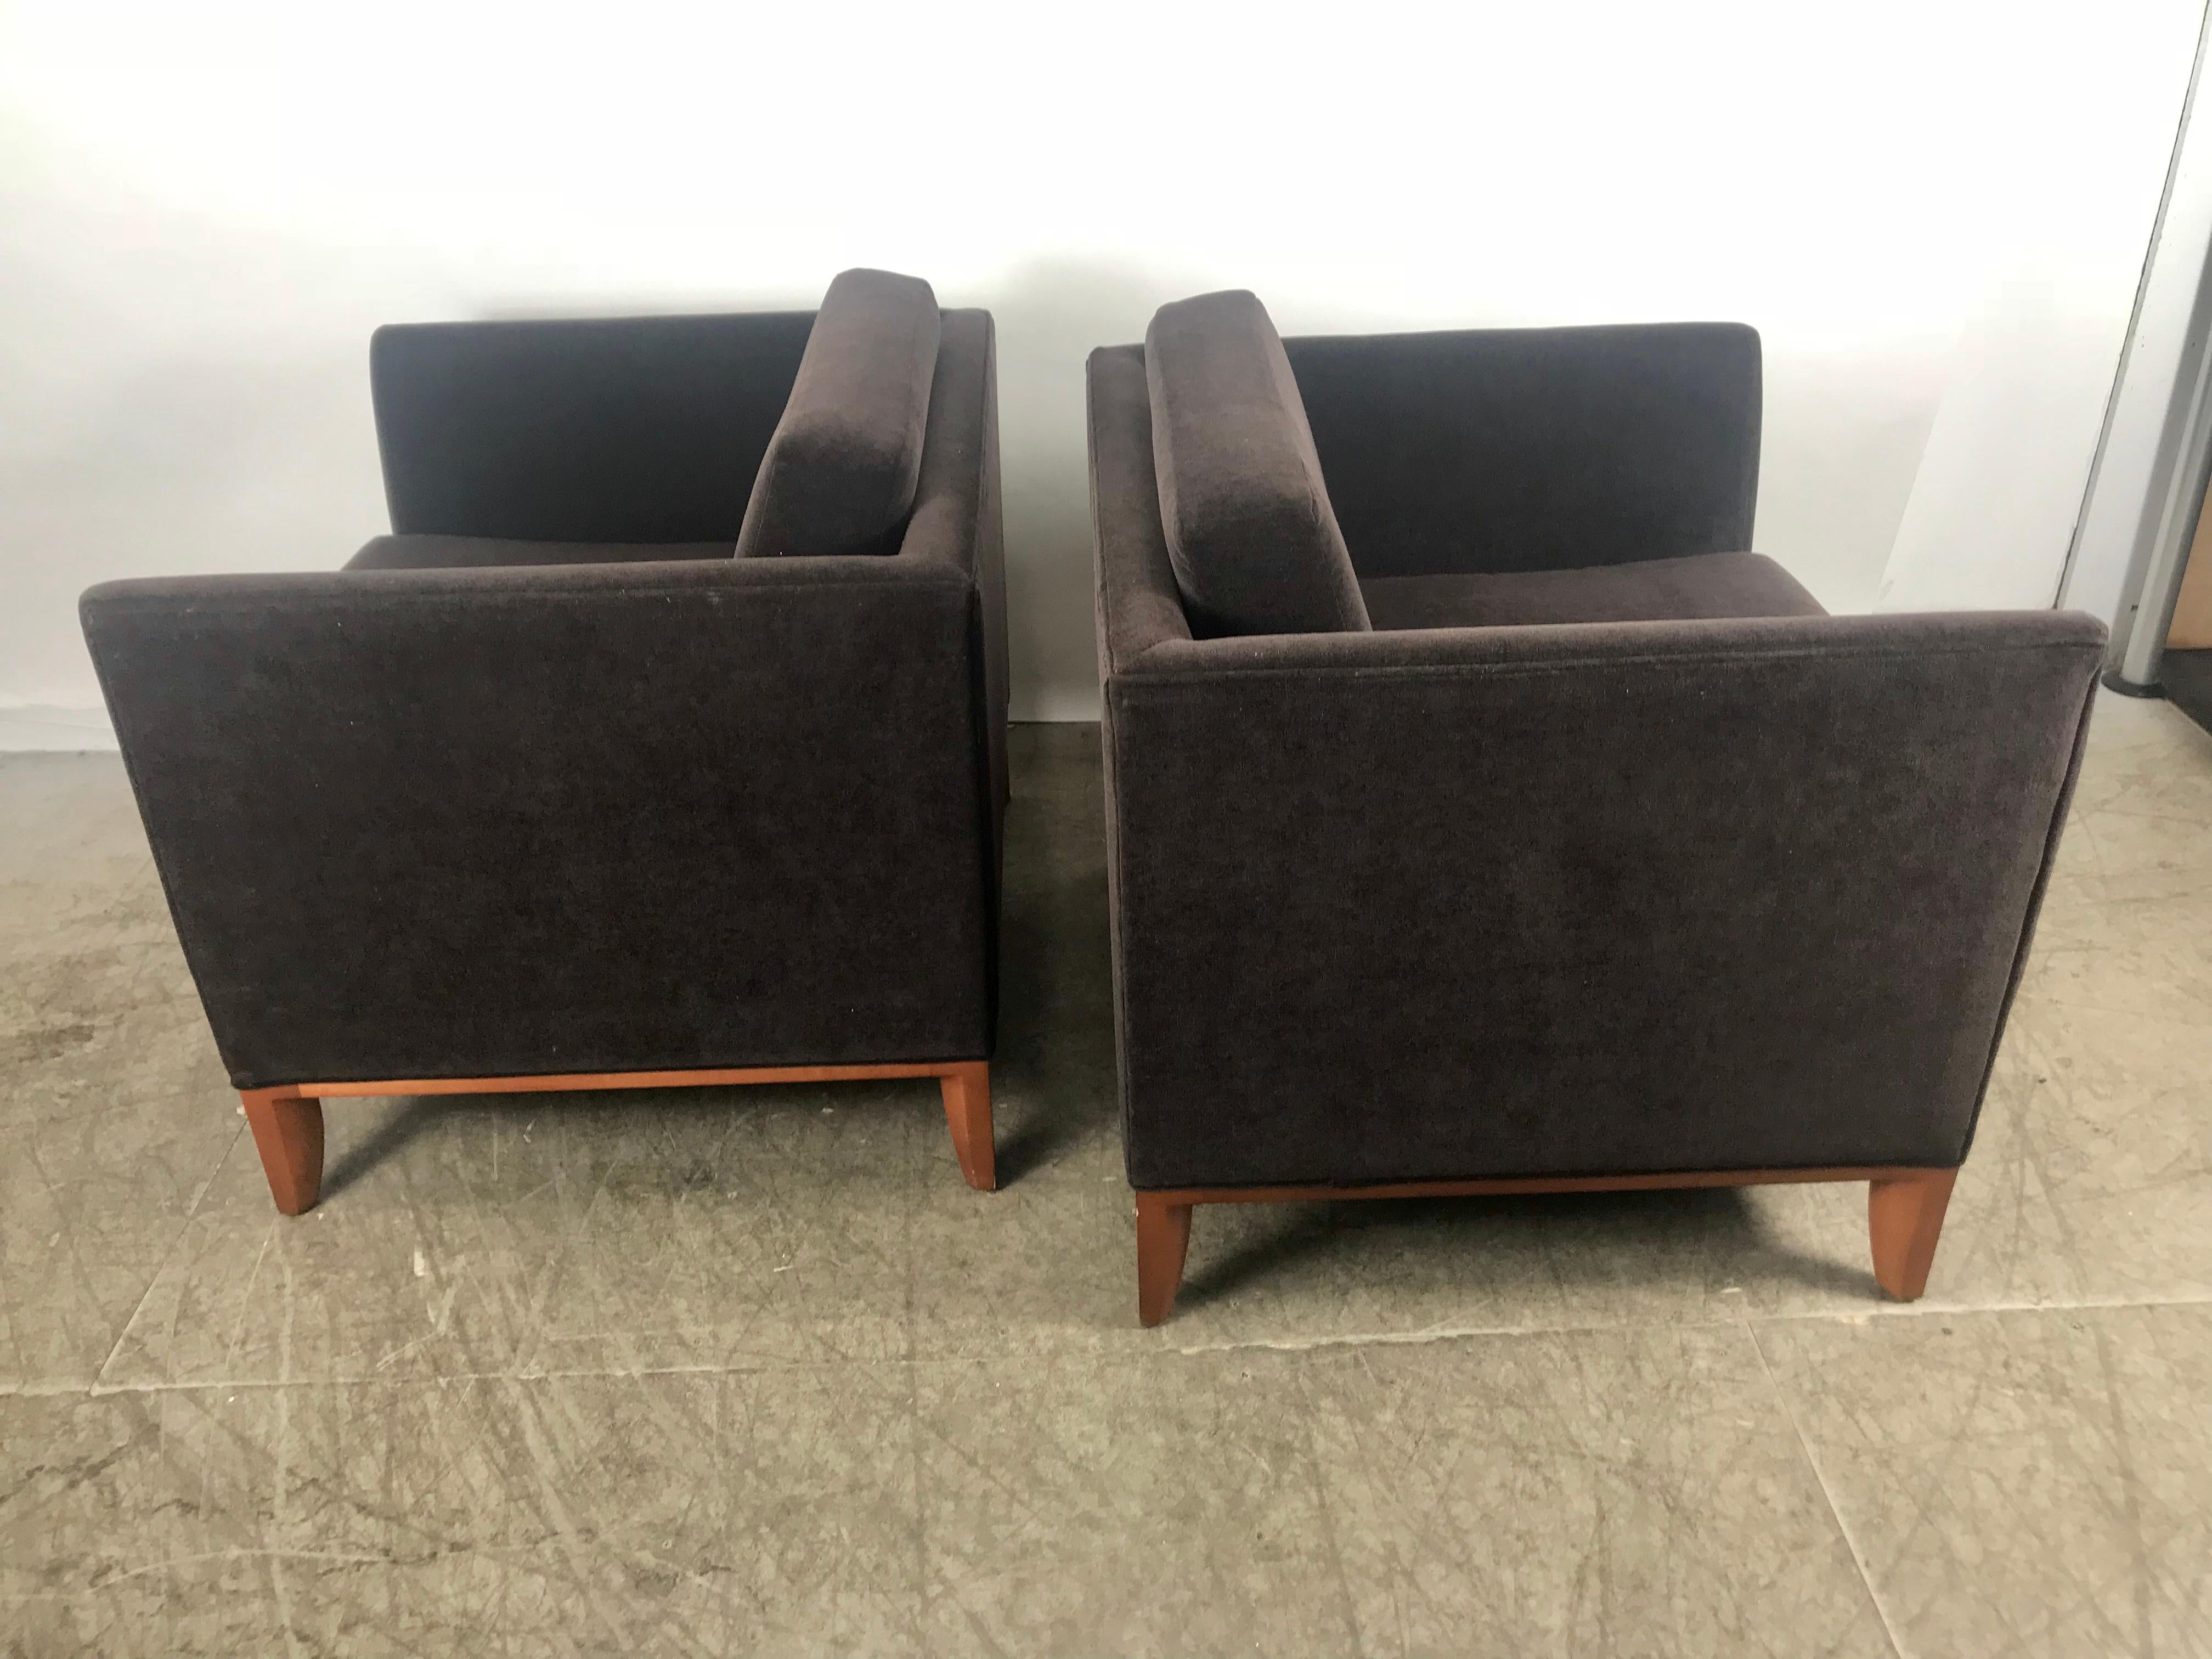 Stunning pair of mohair contemporary cube lounge chairs, Rembrandt Design, superior quality and construction, excellent original condition, hand delivery avail to New York City or anywhere en route from buffalo NY.